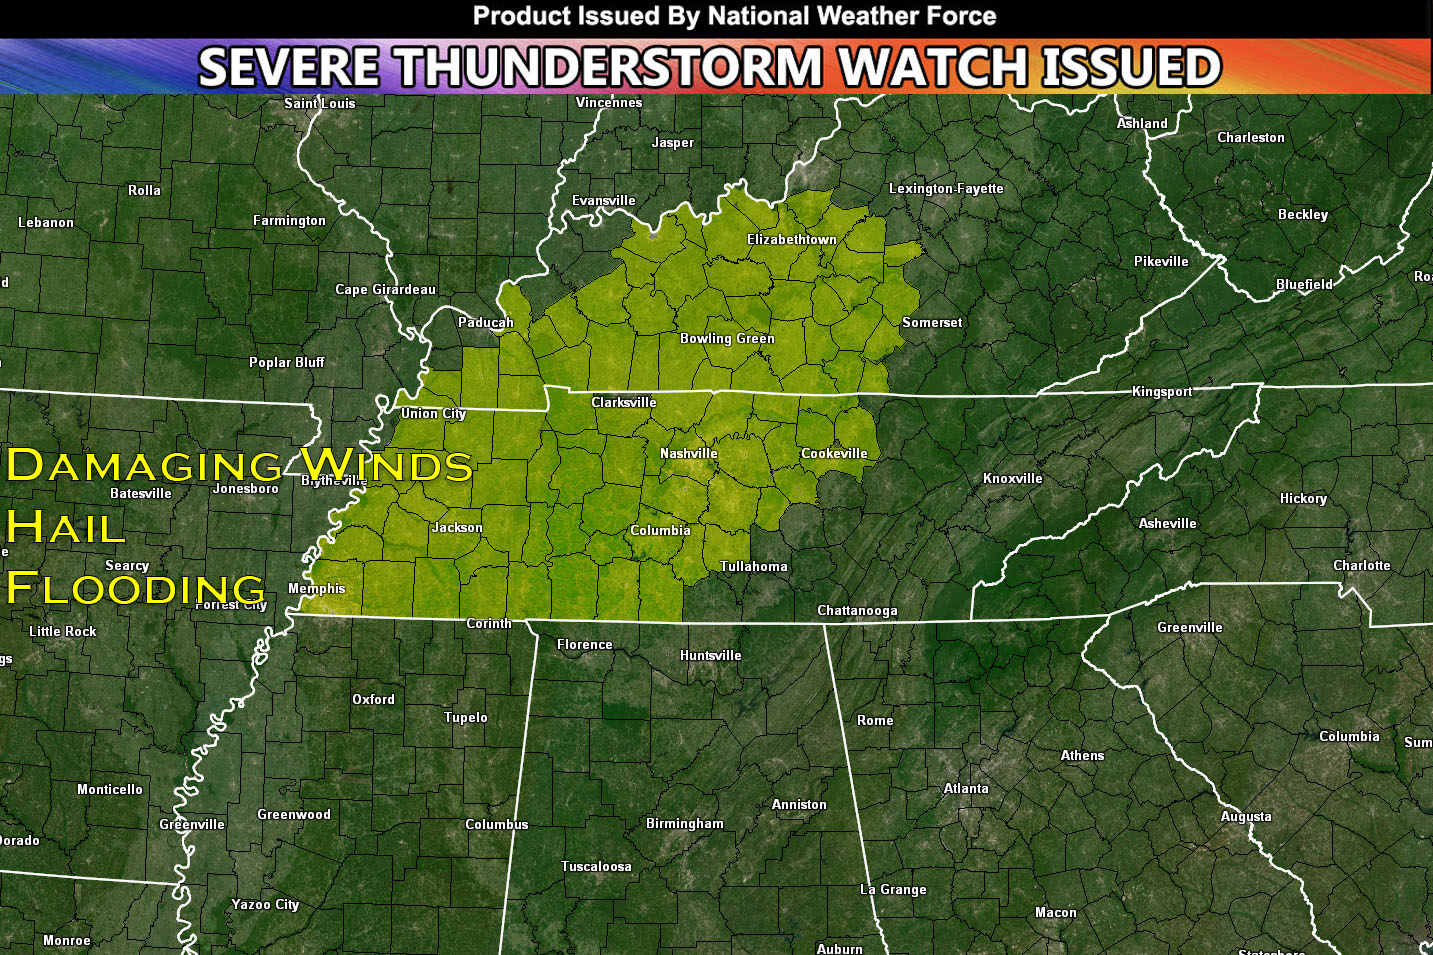 Severe Thunderstorm Watch Issued for West Central Tennessee & West Central Kentucky This Evening Through 11pm EDT